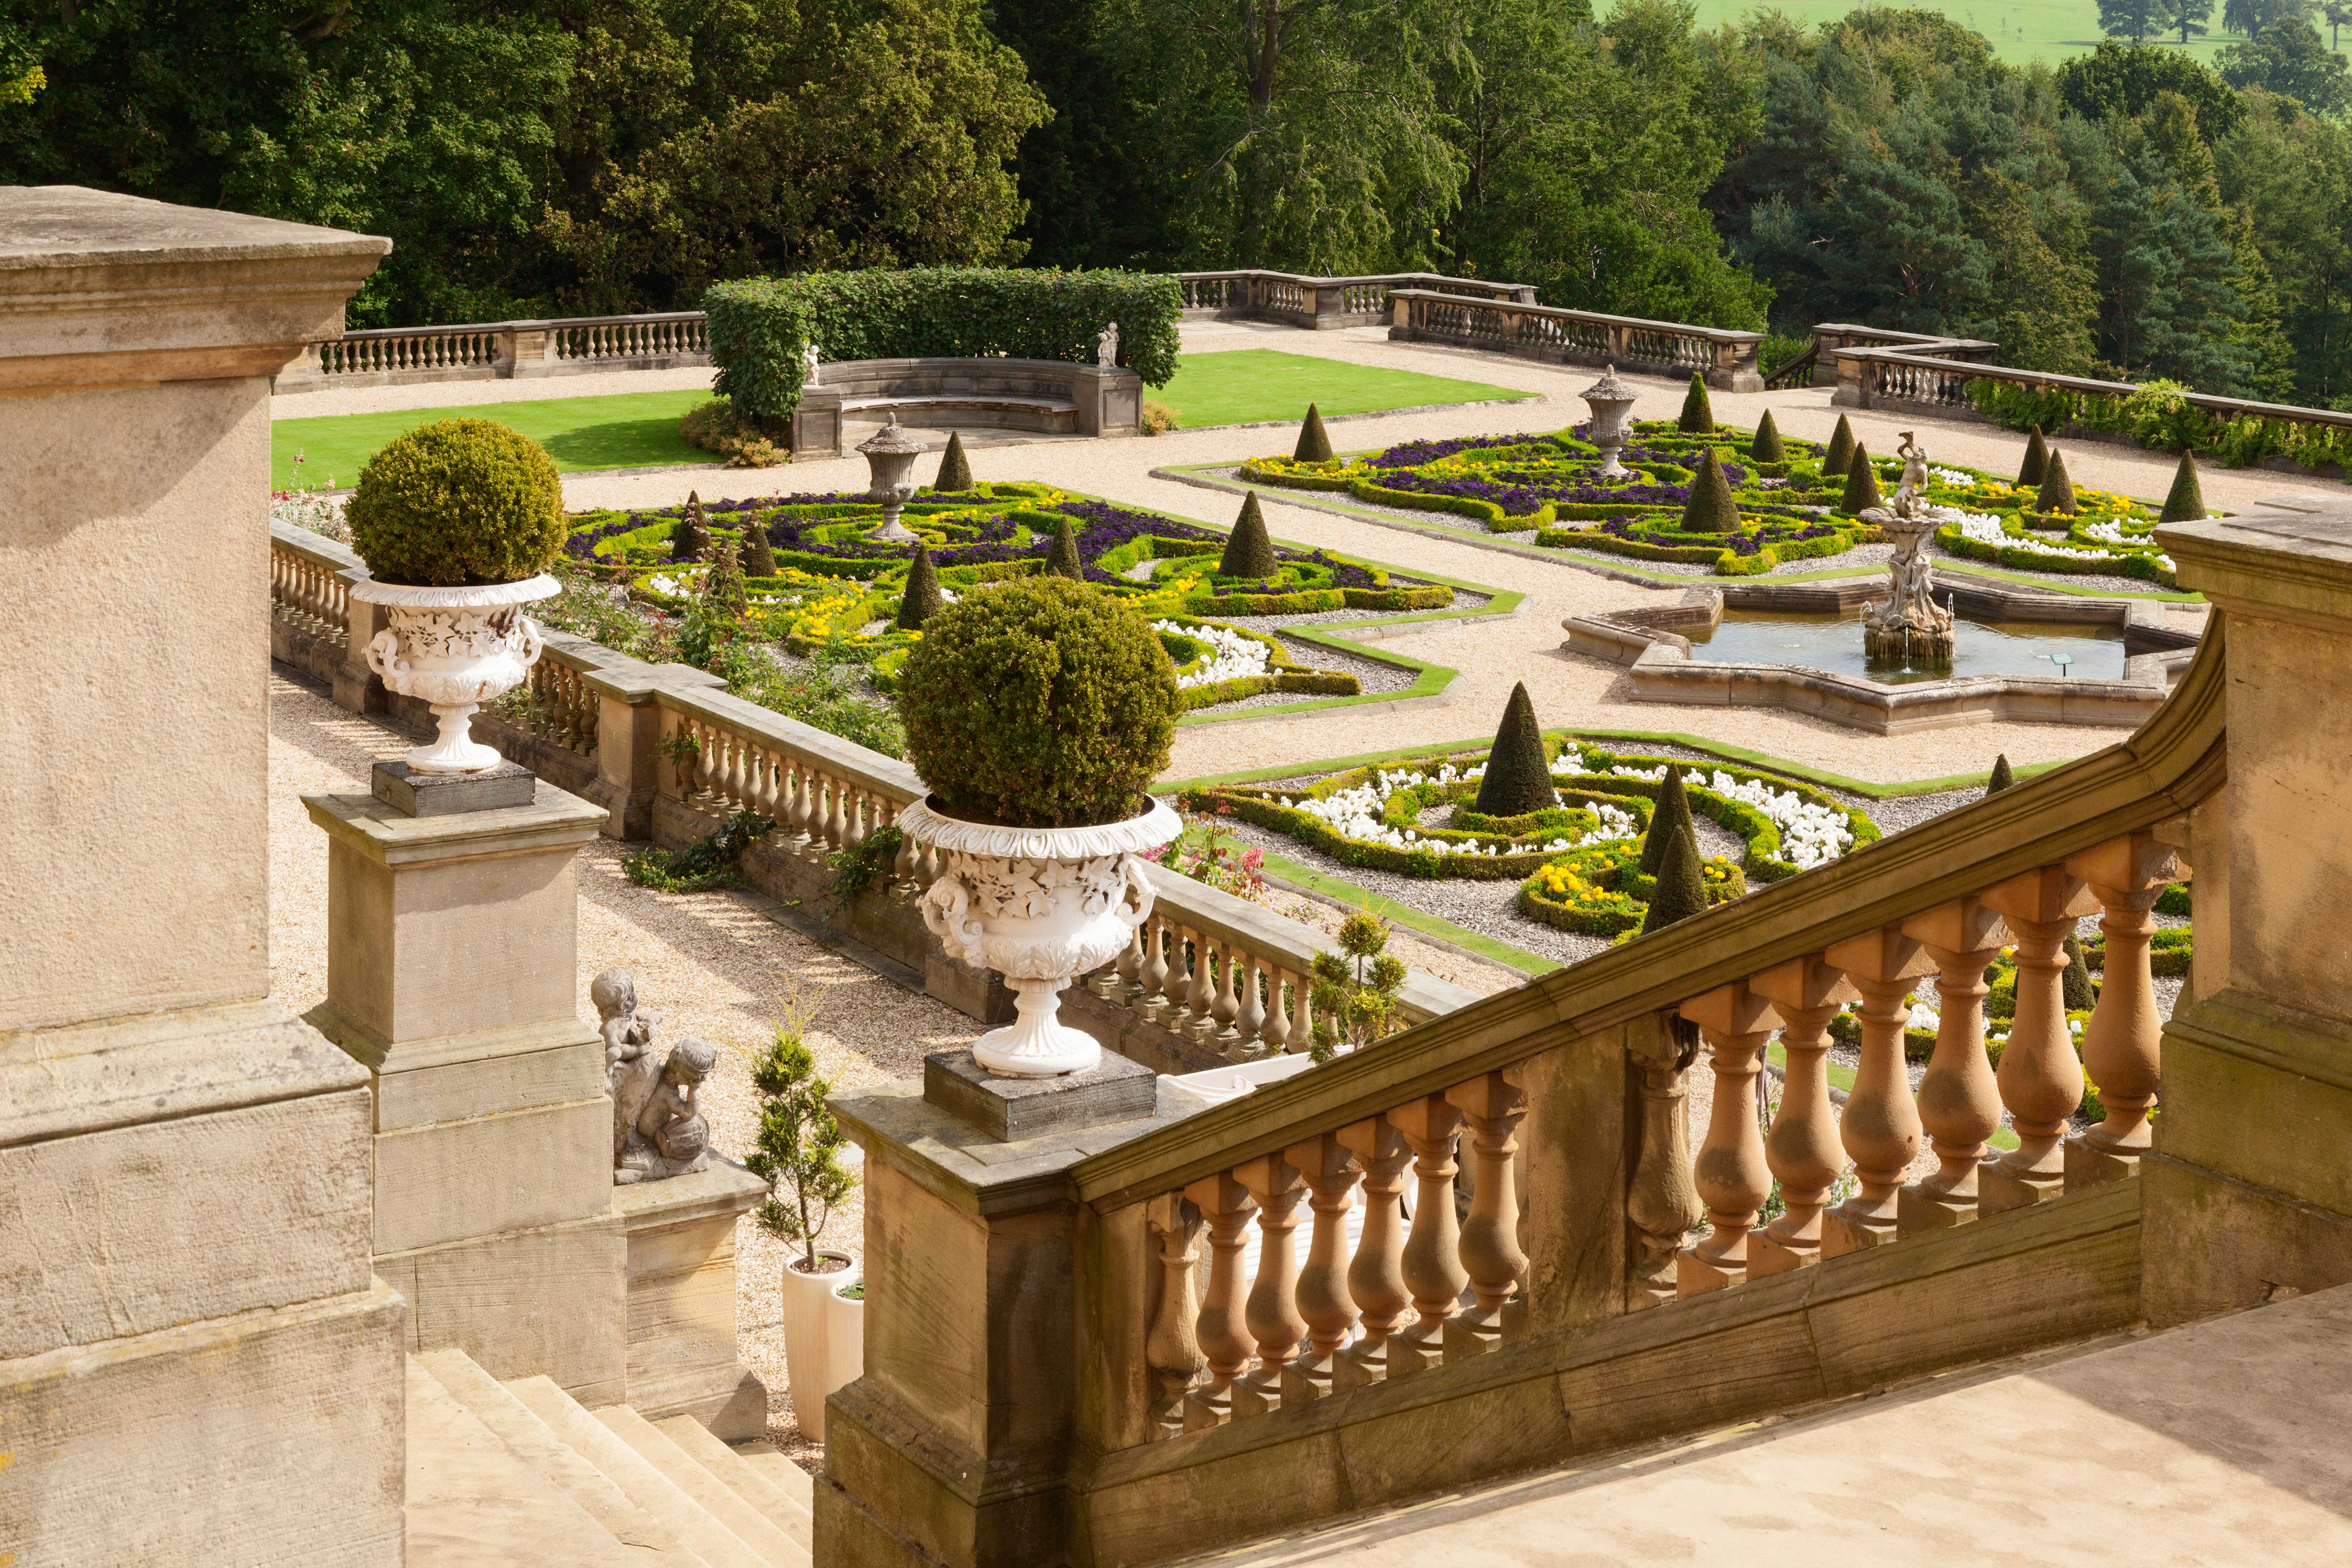 Views of the Terrace garden at Harewood House in Leeds